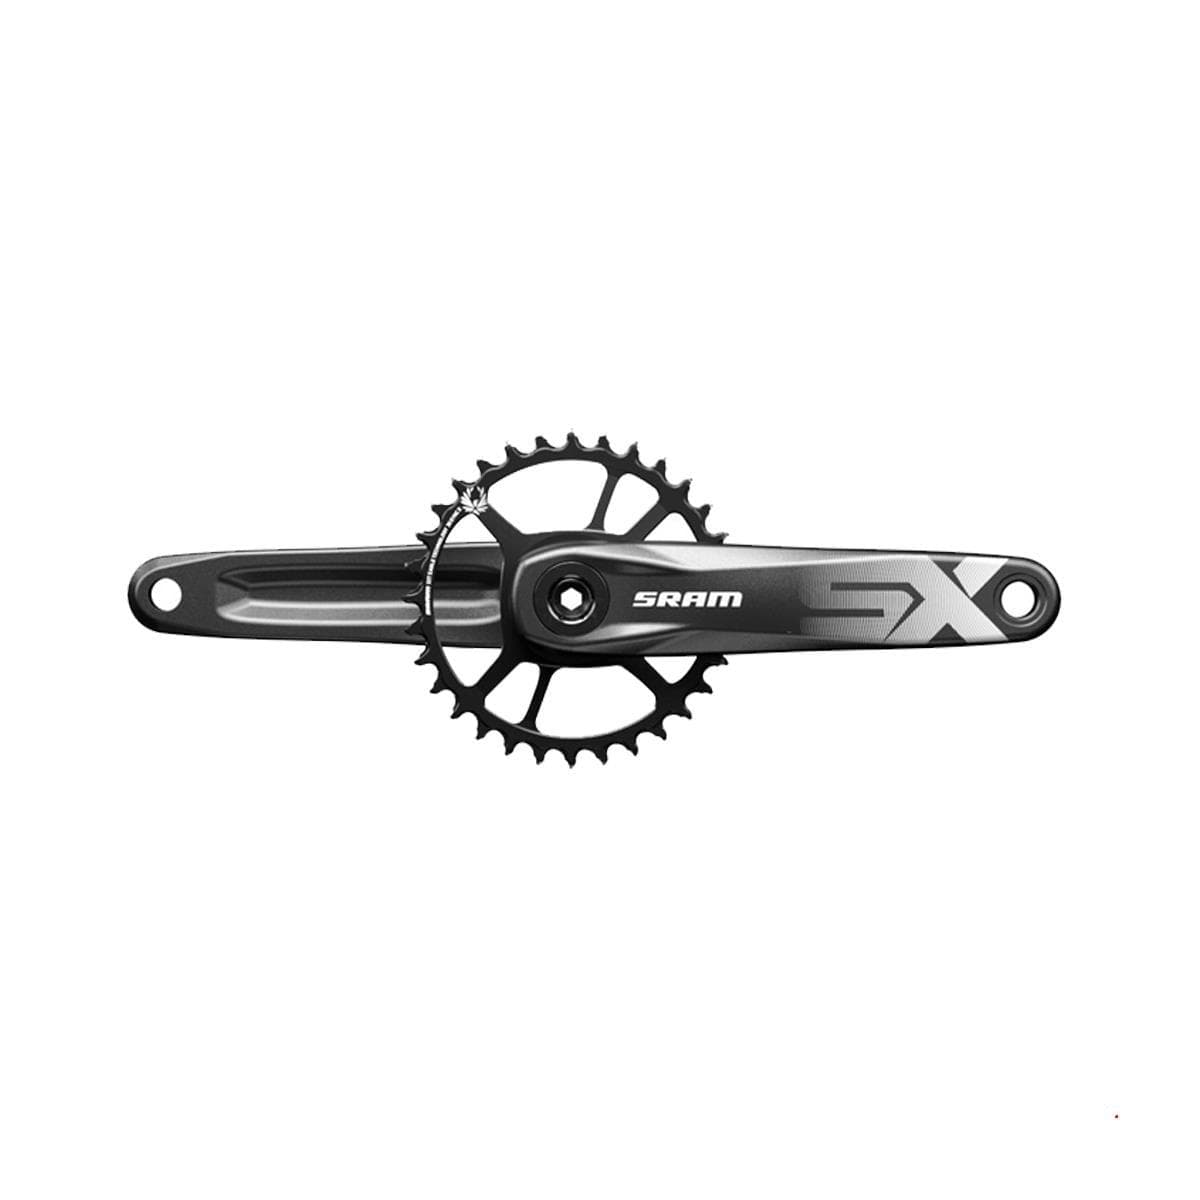 Sram Crankset Sx Eagle Boost 148 Dub 12S With Direct Mount 32T X-Sync 2 Steel Chainring A1: Black 170Mm